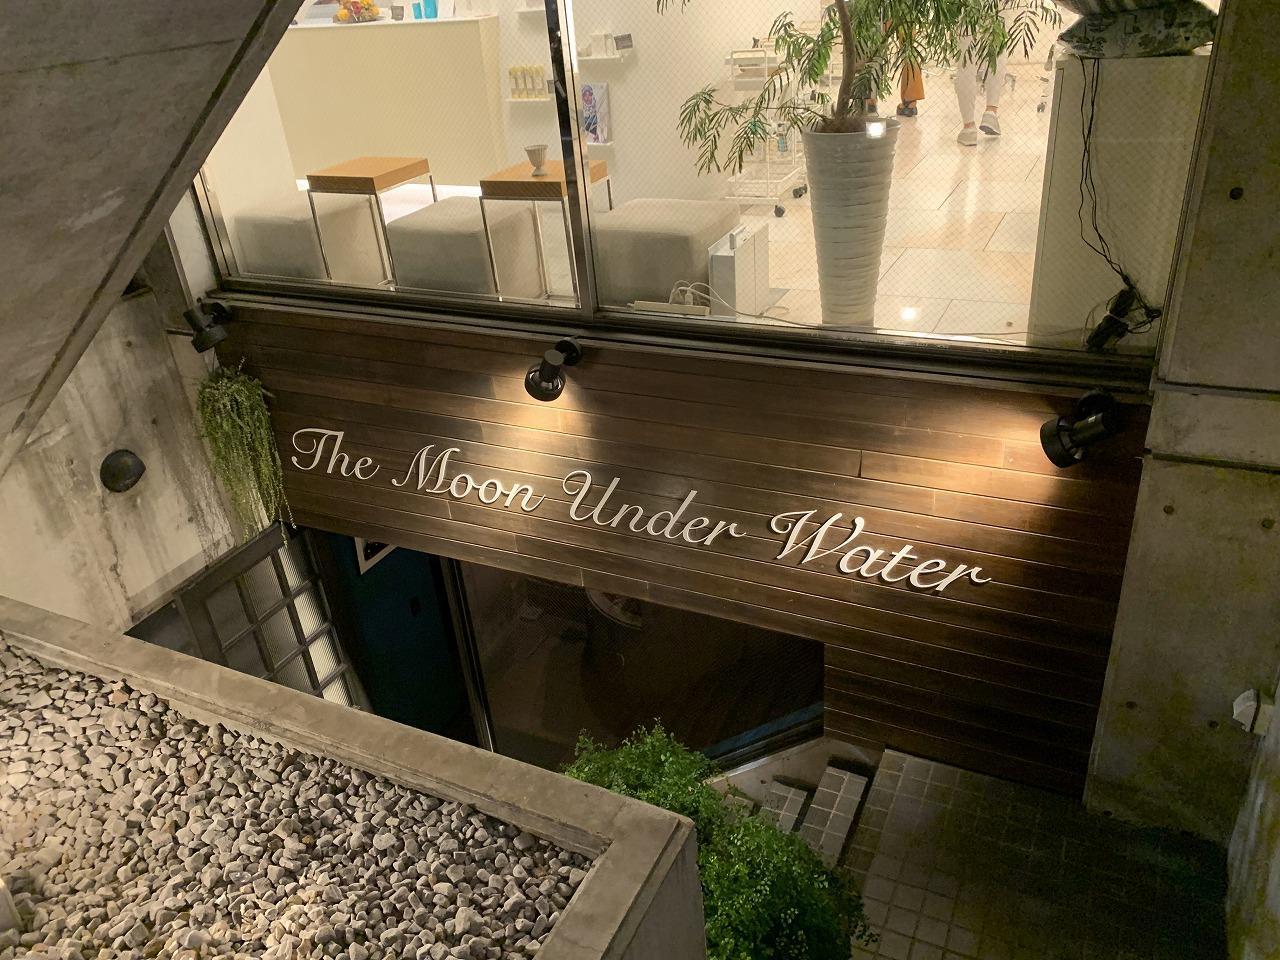 The Moon Under Water (ザ・ムーンアンダーウォーター)